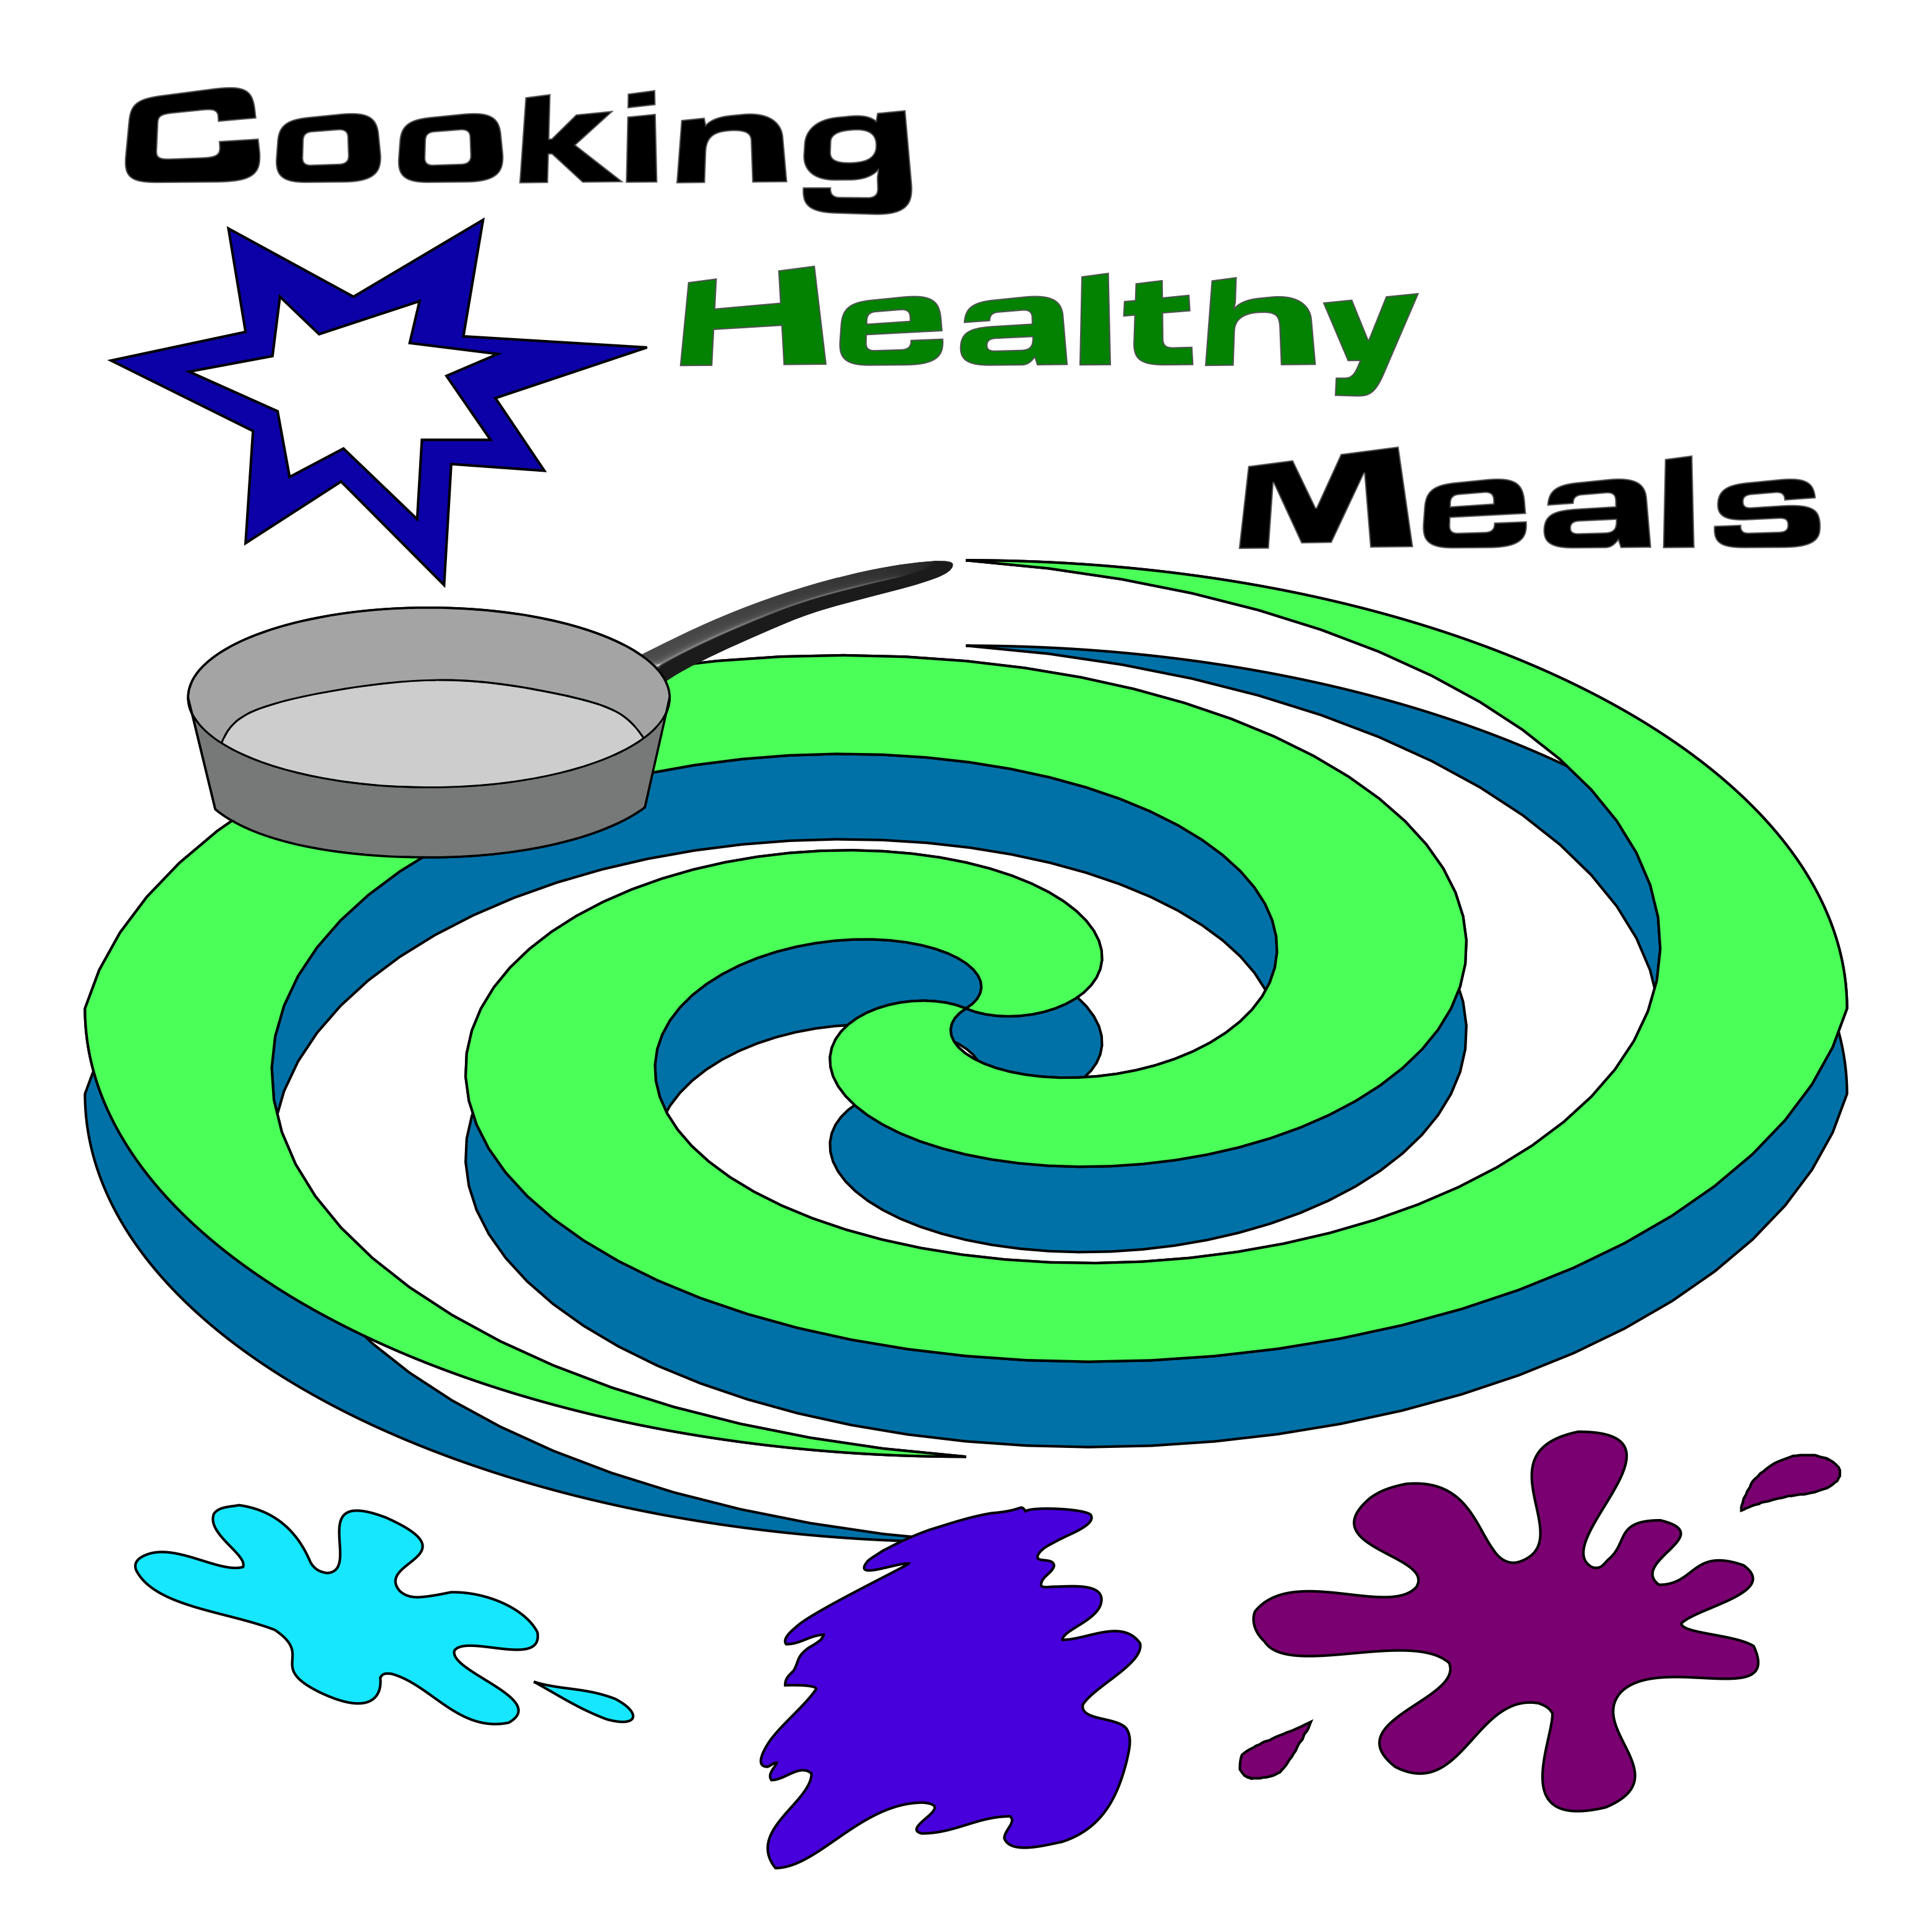 Cooking Healthy Meals